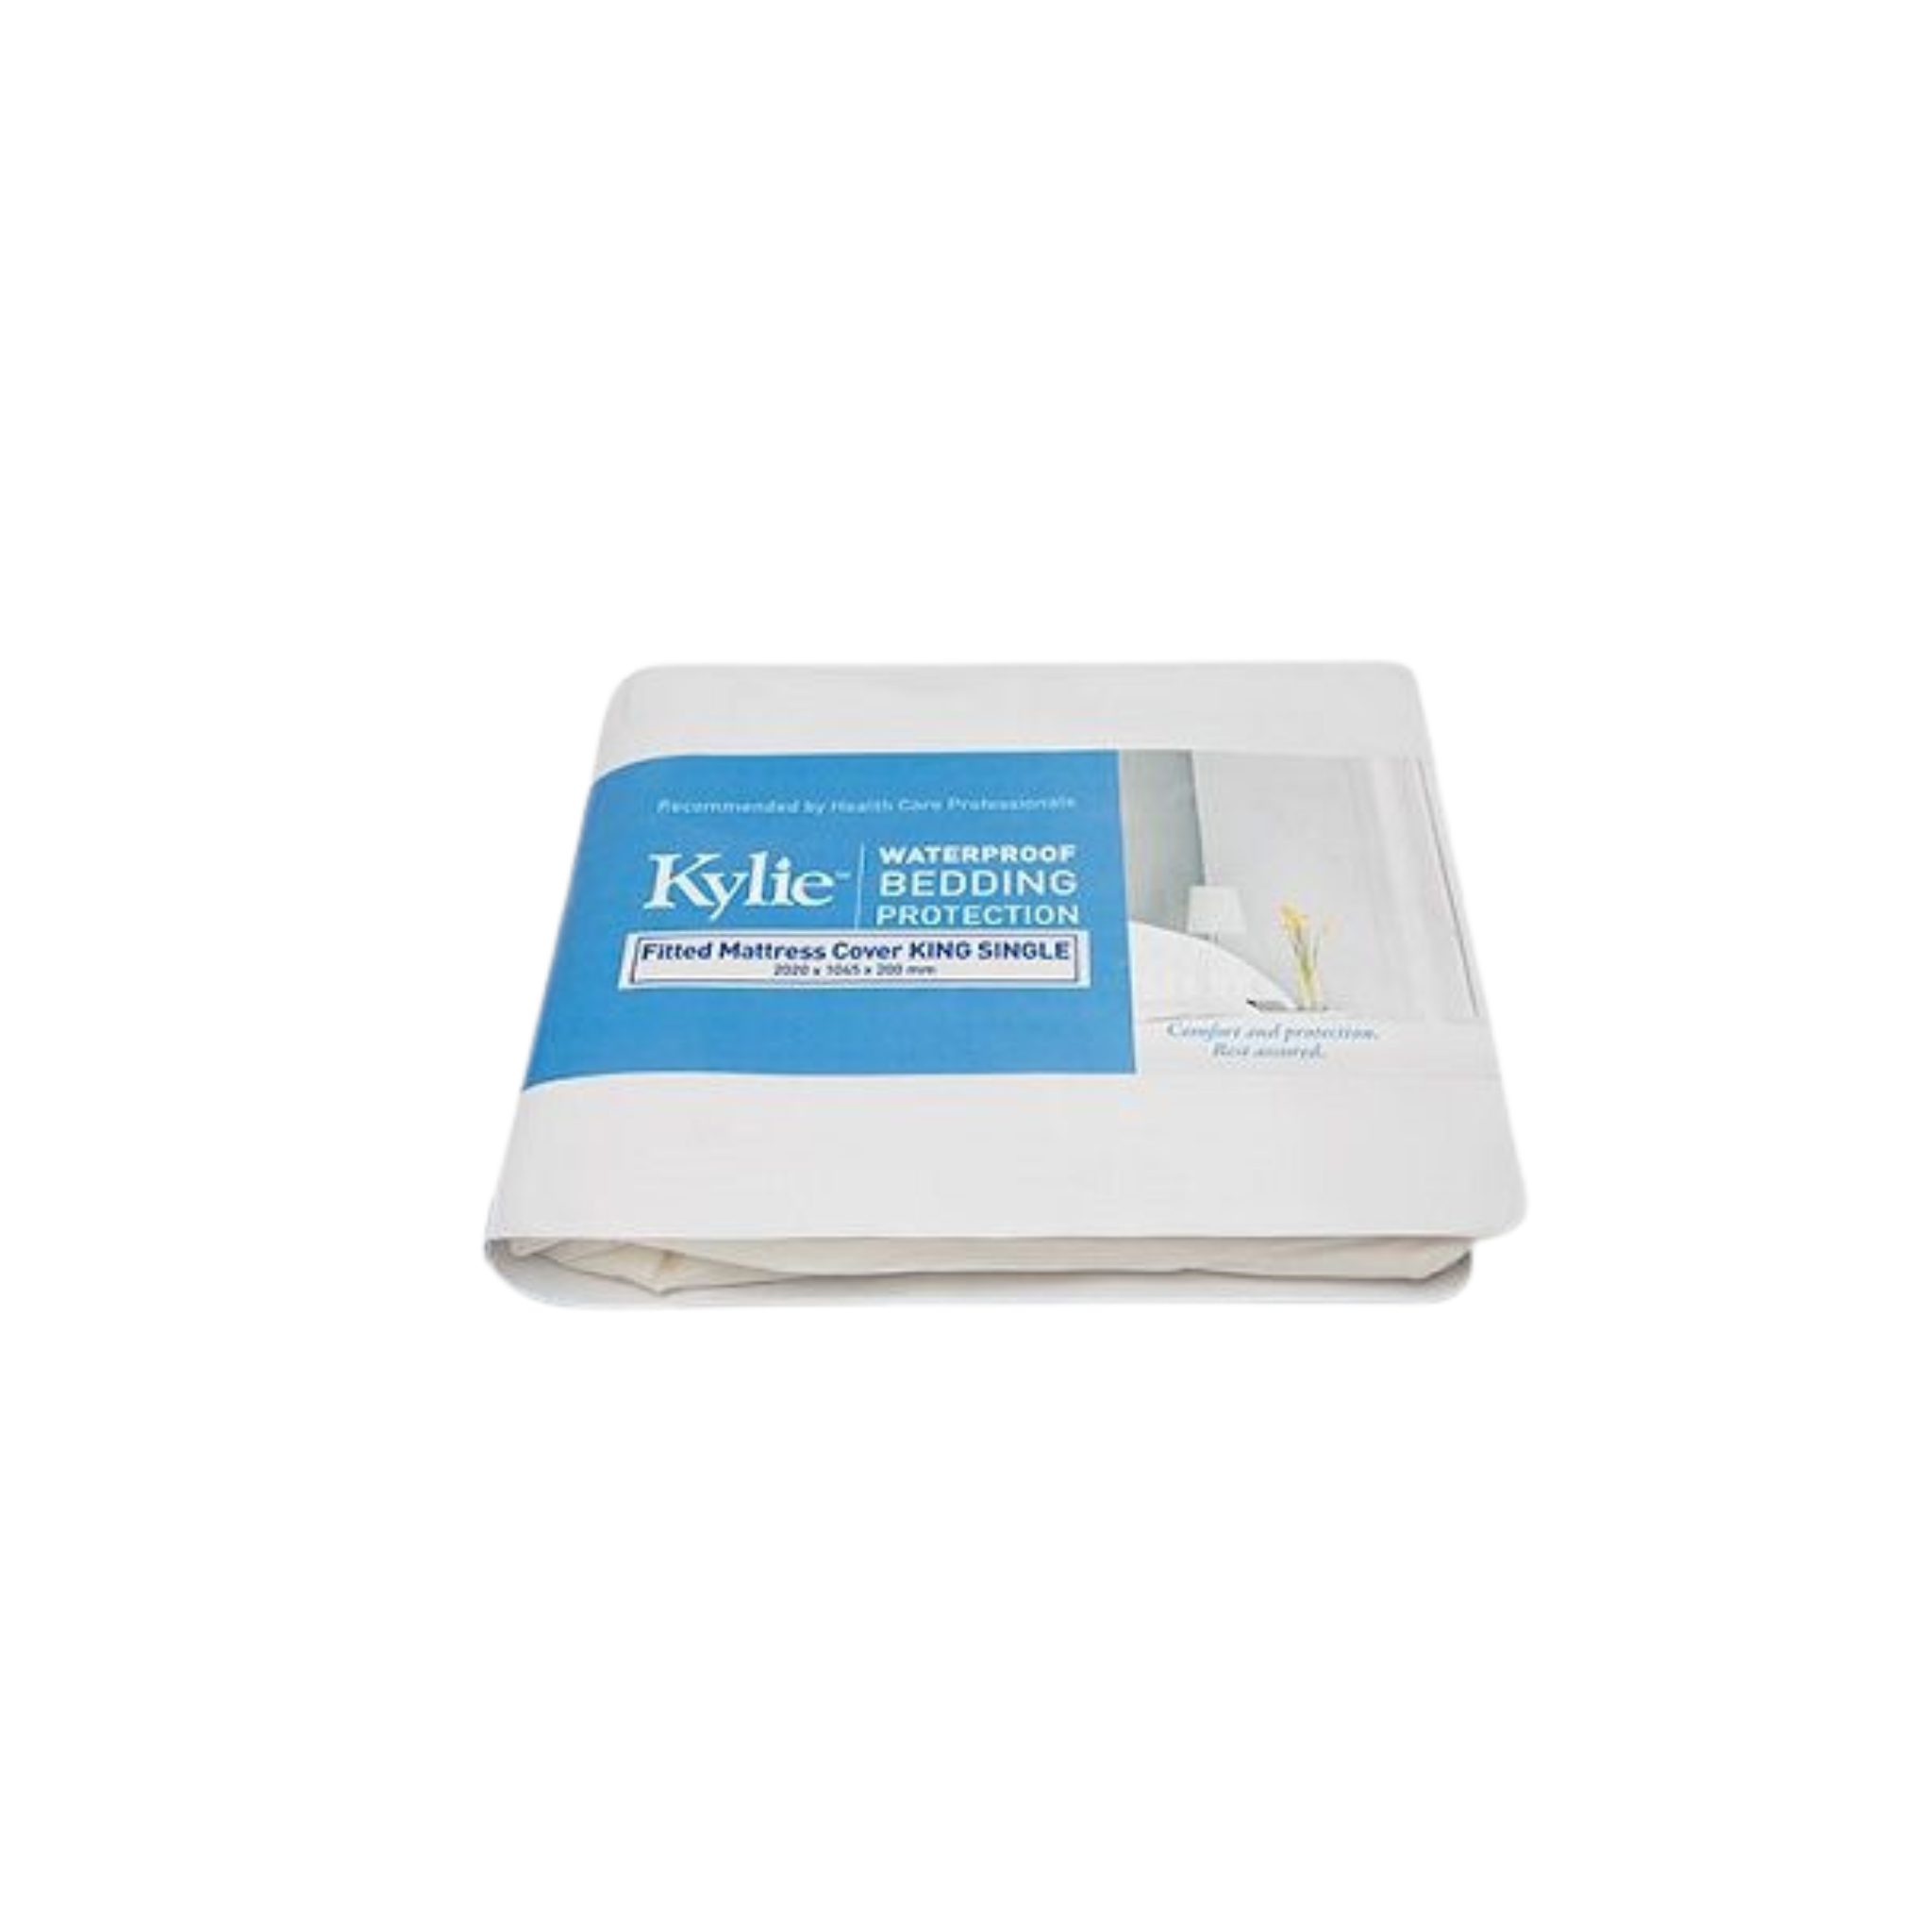 Kylie Fitted Mattress Cover - King Single